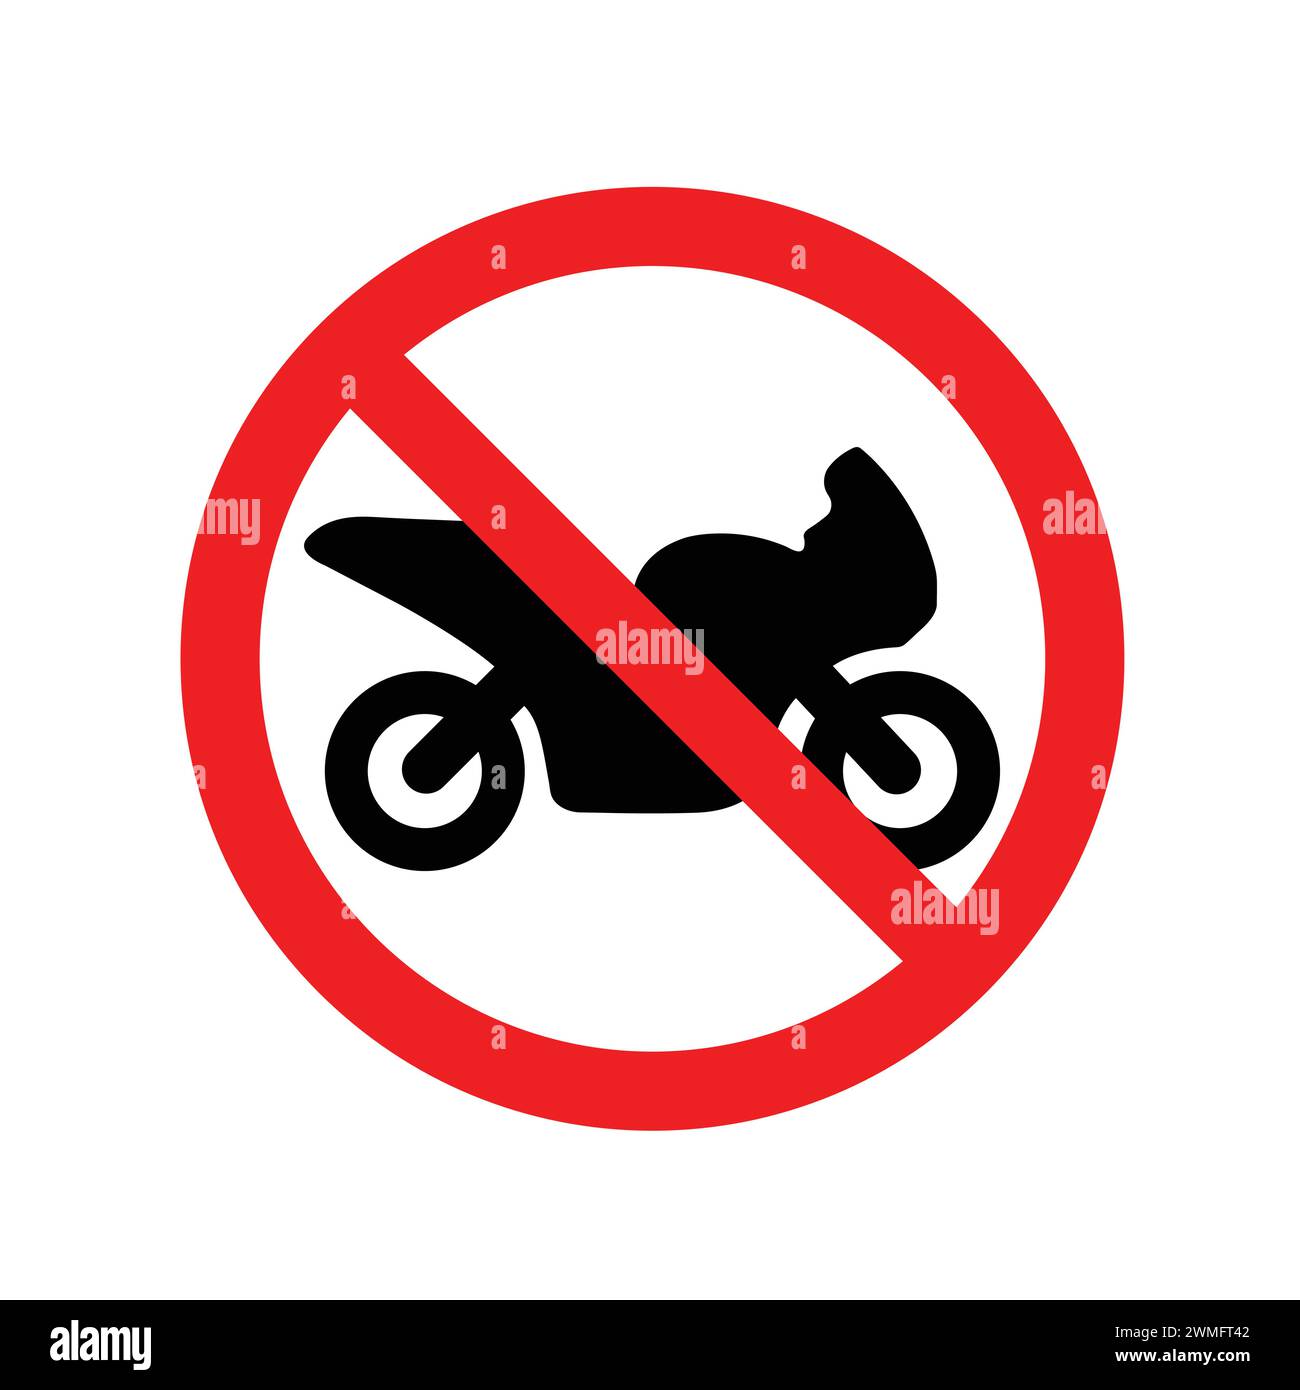 No Motorcycle Allowed Sign. No Motorbike Sign Or No Parking Sign. No Bike Prohibit Icon. Access Forbidden. Attention Icon No E-Motorcycle Road Sign Stock Vector